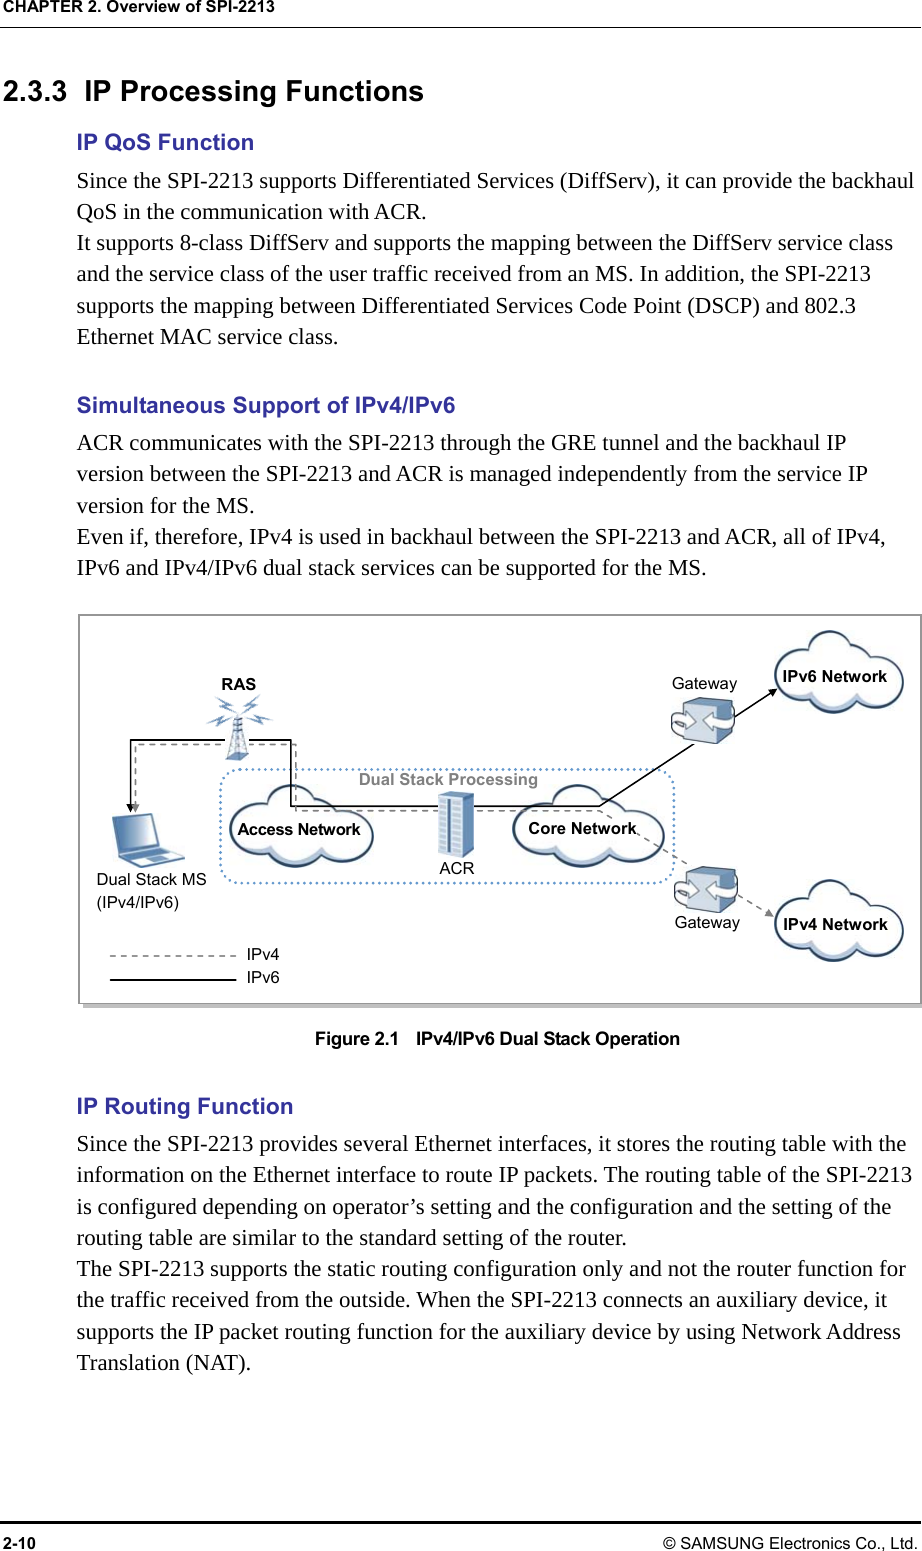 CHAPTER 2. Overview of SPI-2213 2-10 © SAMSUNG Electronics Co., Ltd. 2.3.3  IP Processing Functions IP QoS Function Since the SPI-2213 supports Differentiated Services (DiffServ), it can provide the backhaul QoS in the communication with ACR. It supports 8-class DiffServ and supports the mapping between the DiffServ service class and the service class of the user traffic received from an MS. In addition, the SPI-2213 supports the mapping between Differentiated Services Code Point (DSCP) and 802.3 Ethernet MAC service class.  Simultaneous Support of IPv4/IPv6 ACR communicates with the SPI-2213 through the GRE tunnel and the backhaul IP version between the SPI-2213 and ACR is managed independently from the service IP version for the MS. Even if, therefore, IPv4 is used in backhaul between the SPI-2213 and ACR, all of IPv4, IPv6 and IPv4/IPv6 dual stack services can be supported for the MS.  Figure 2.1    IPv4/IPv6 Dual Stack Operation  IP Routing Function Since the SPI-2213 provides several Ethernet interfaces, it stores the routing table with the information on the Ethernet interface to route IP packets. The routing table of the SPI-2213 is configured depending on operator’s setting and the configuration and the setting of the routing table are similar to the standard setting of the router. The SPI-2213 supports the static routing configuration only and not the router function for the traffic received from the outside. When the SPI-2213 connects an auxiliary device, it supports the IP packet routing function for the auxiliary device by using Network Address Translation (NAT).  IPv4 IPv6 Dual Stack MS (IPv4/IPv6) RAS ACRIPv6 Network IPv4 Network Access Network Dual Stack Processing Gateway Gateway Core Network 